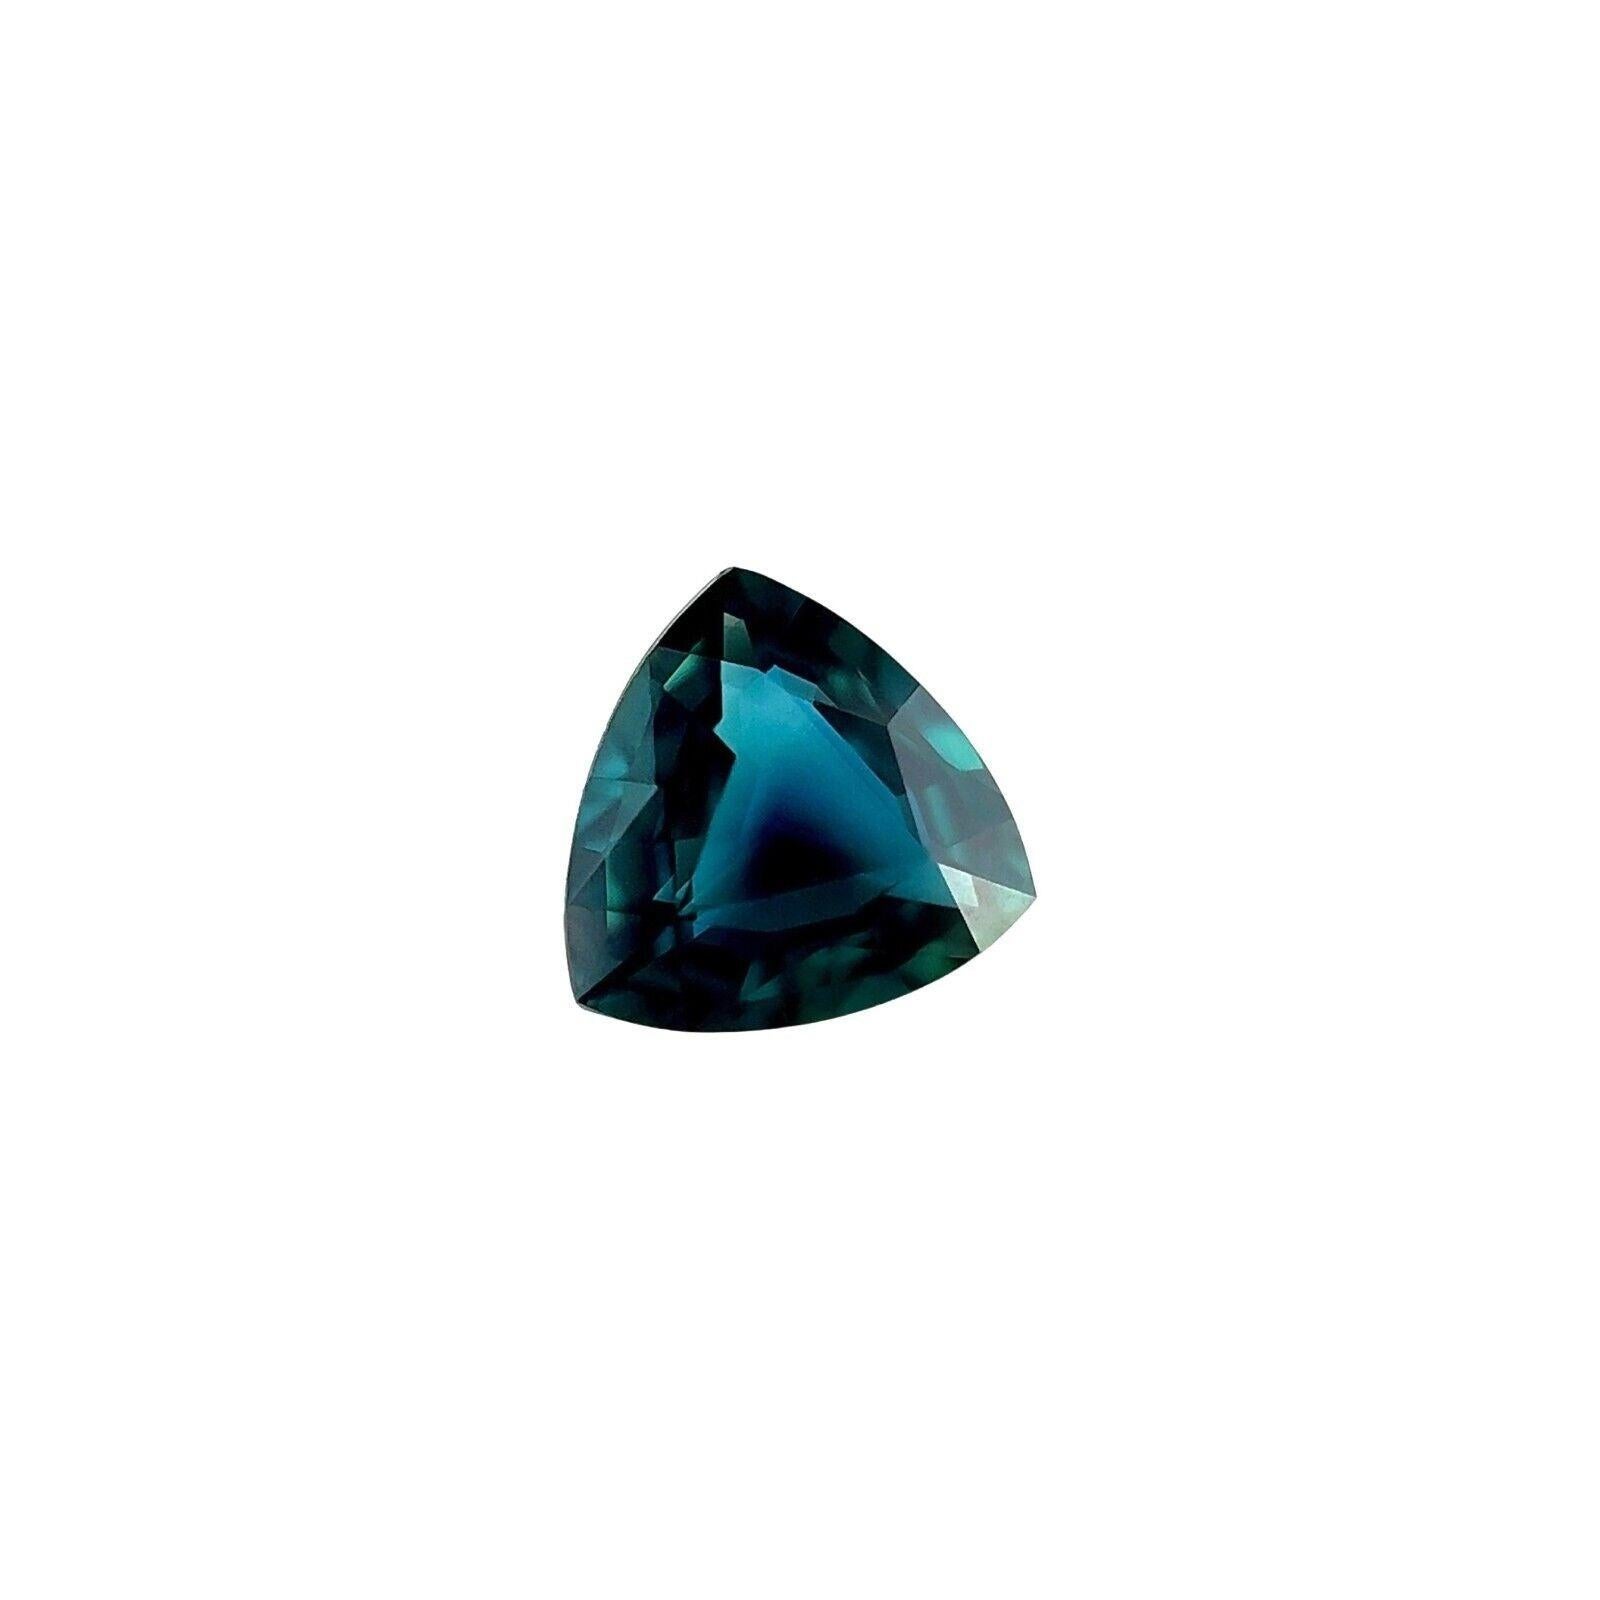 GIA Certified 1.15Ct Blue Sapphire Untreated Fine Natural Triangle Cut Gemstone

GIA Certified Untreated Deep Blue Sapphire Gemstone.
1.15 Carat unheated sapphire with a fine deep blue colour and excellent clarity, a very clean stone.
This sapphire